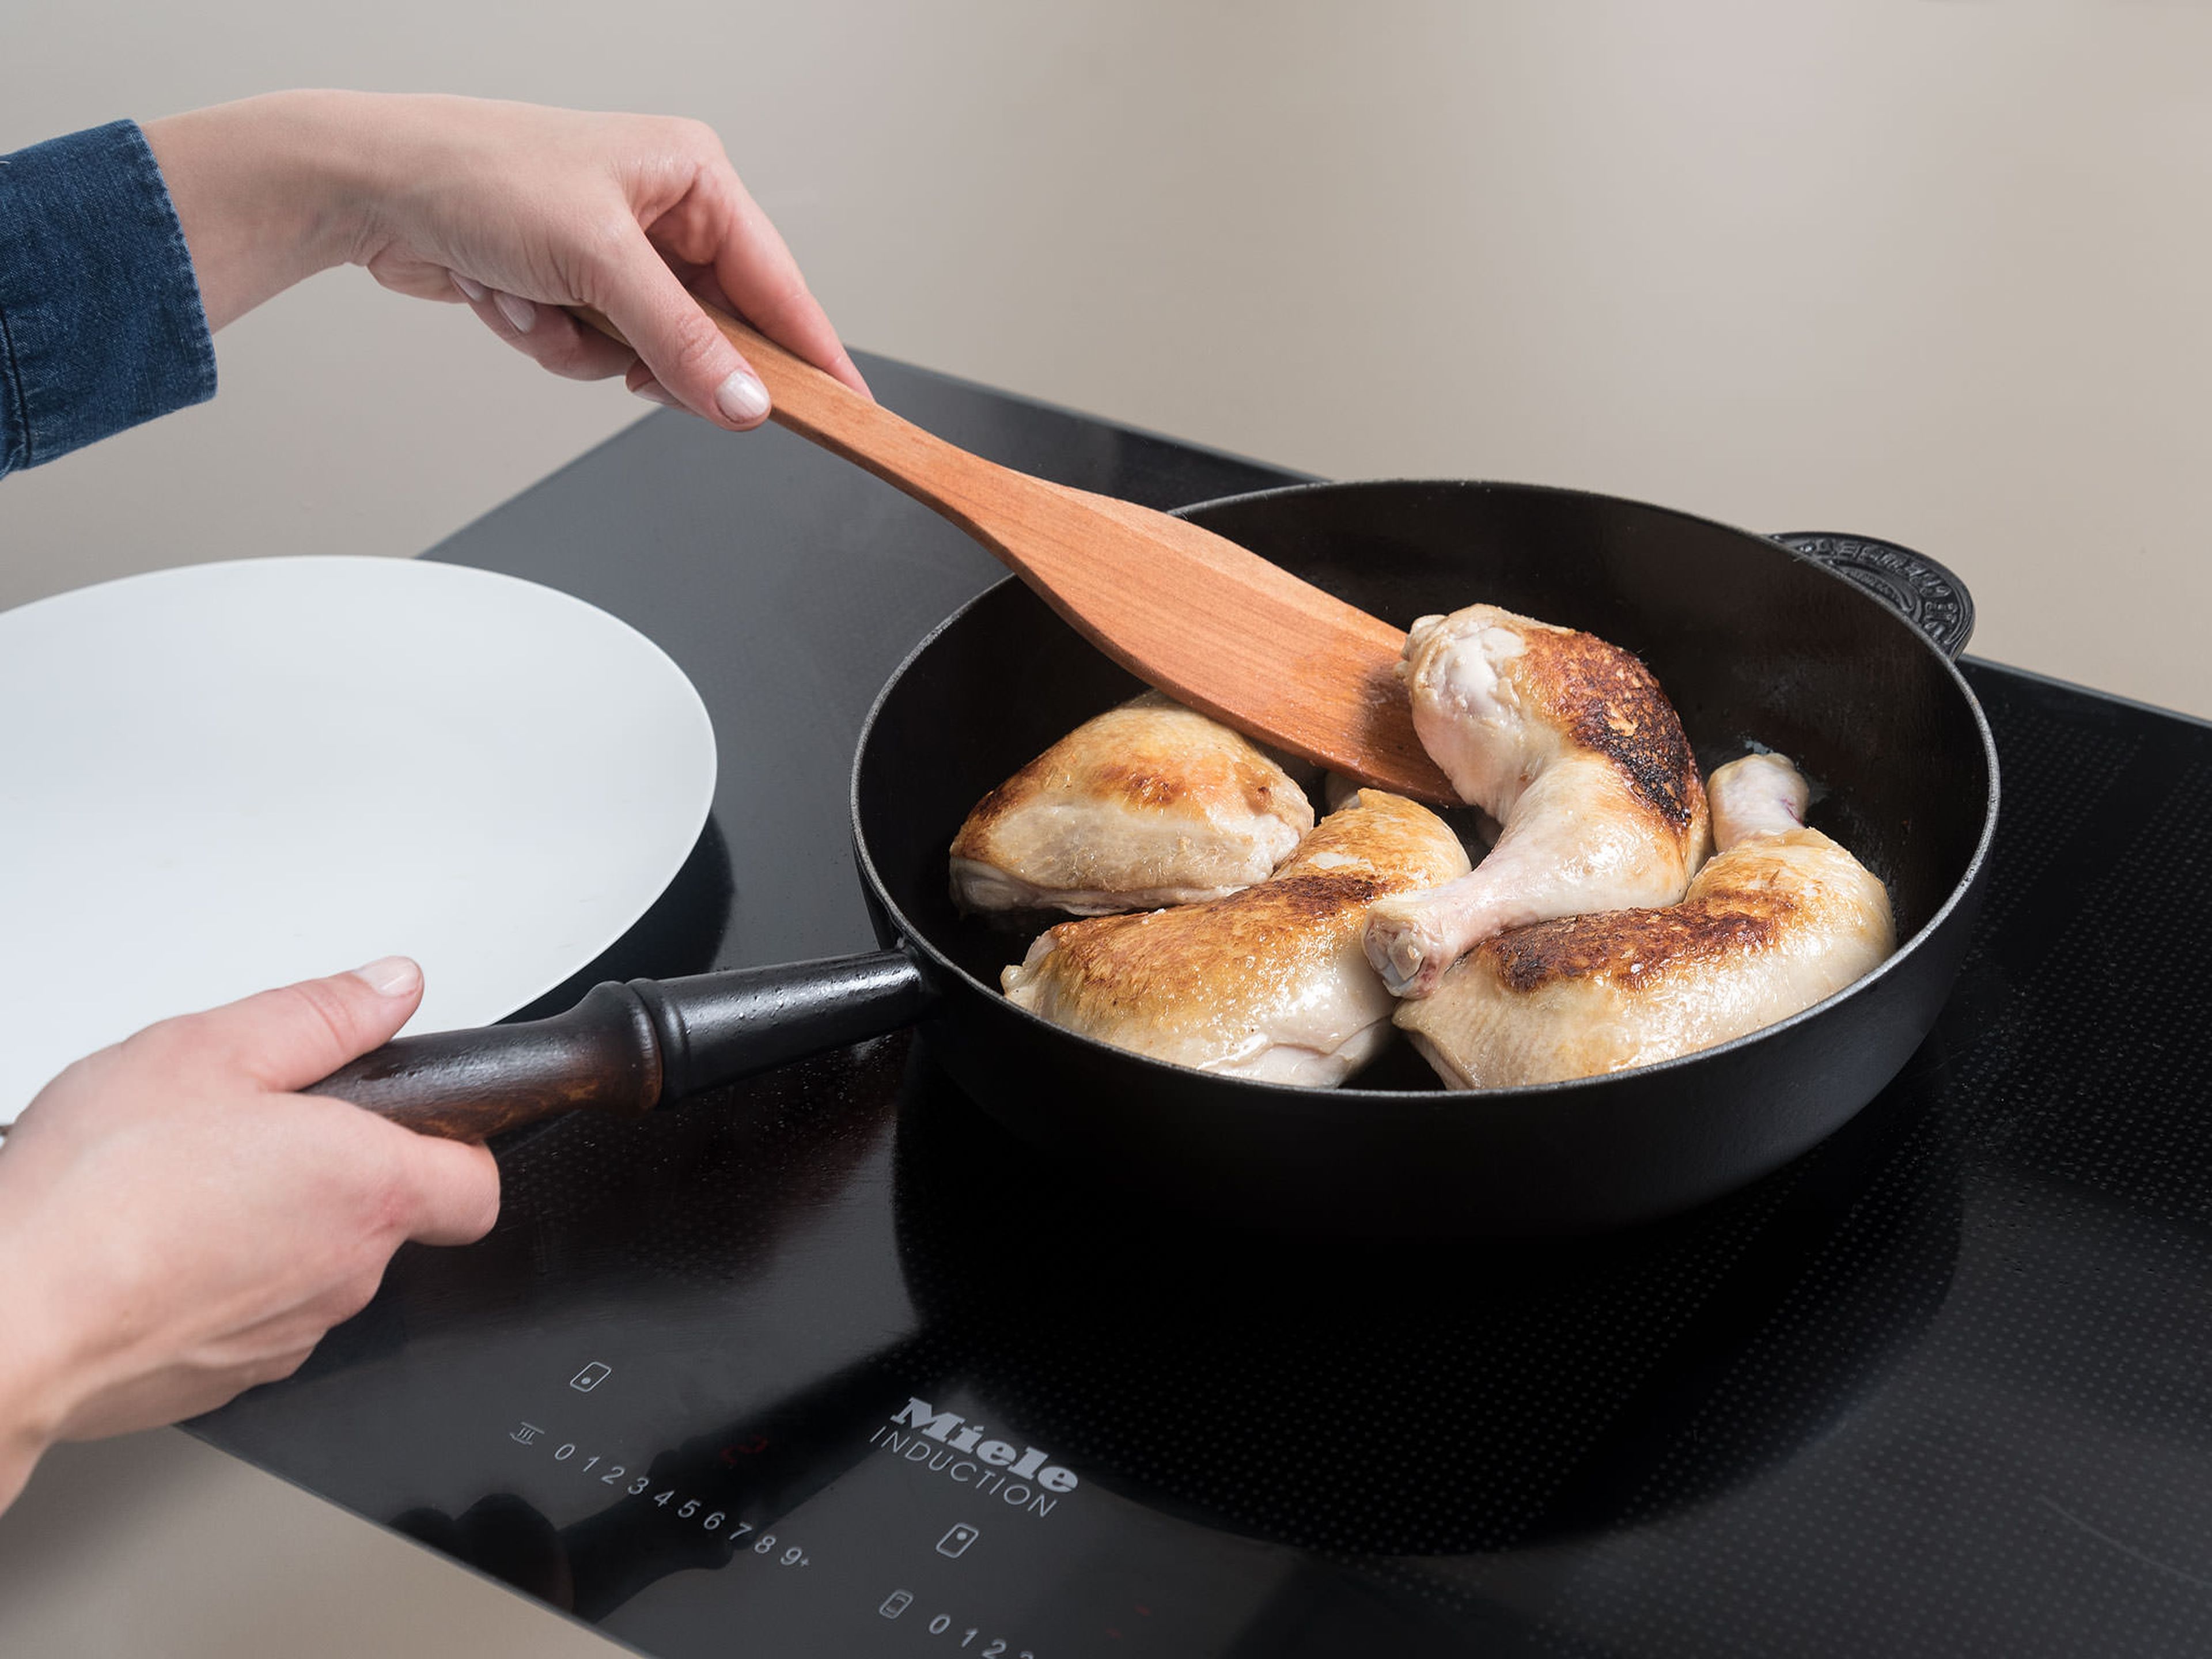 Pat chicken legs dry with a paper towel, then season with salt and pepper. Heat a large ovenproof frying pan over medium-high heat. Add olive oil and chicken and cook until browned on all sides. Transfer to a plate.